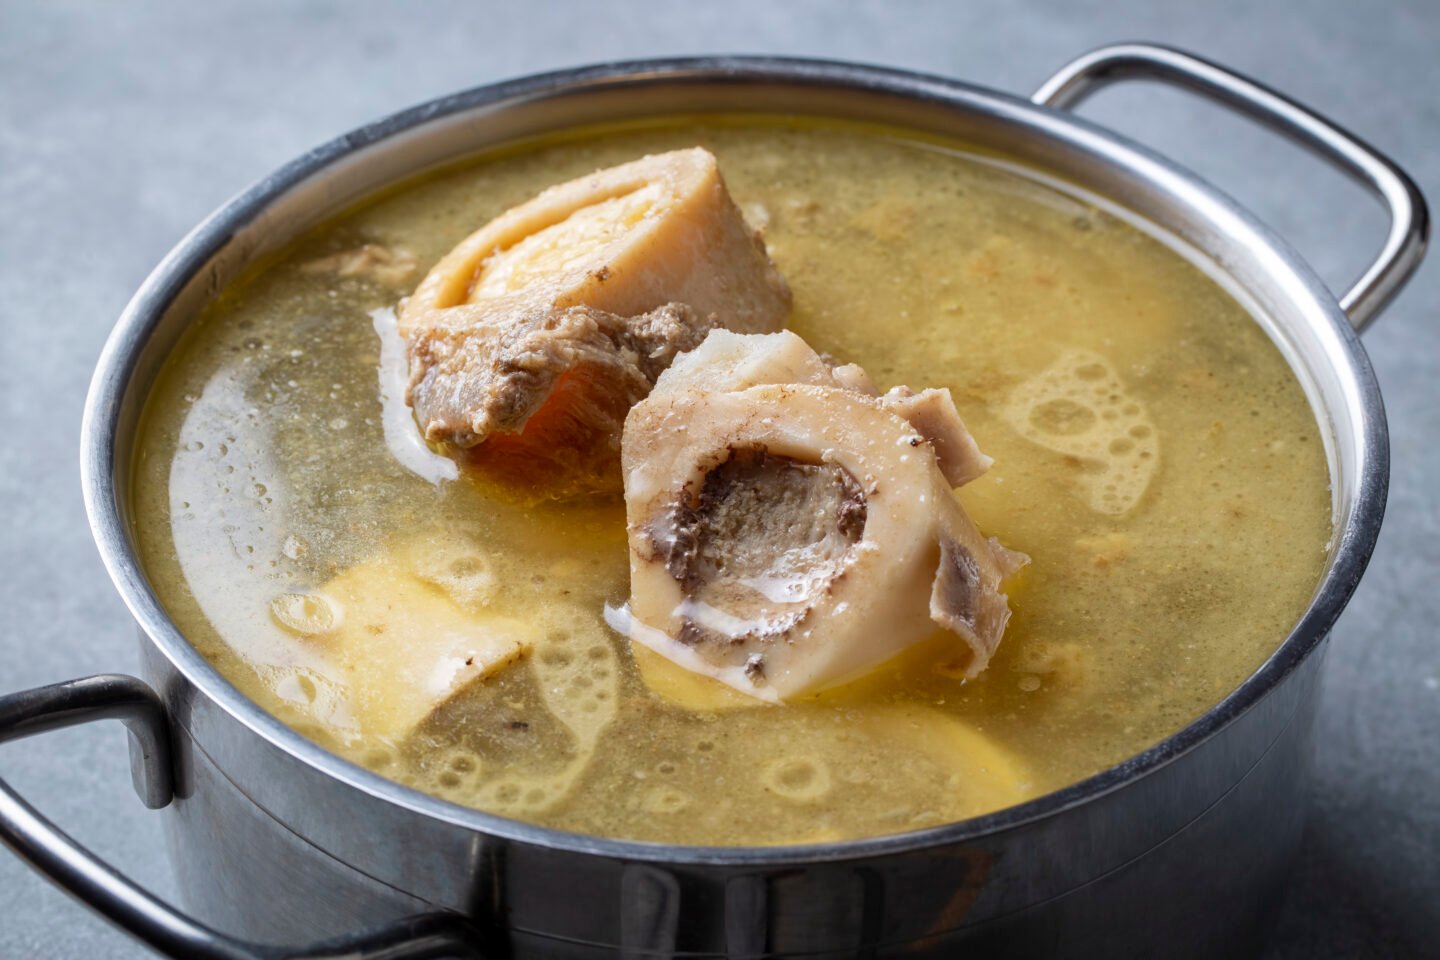 Boiled bone and broth. Homemade beef bone broth is cooked in a pot.